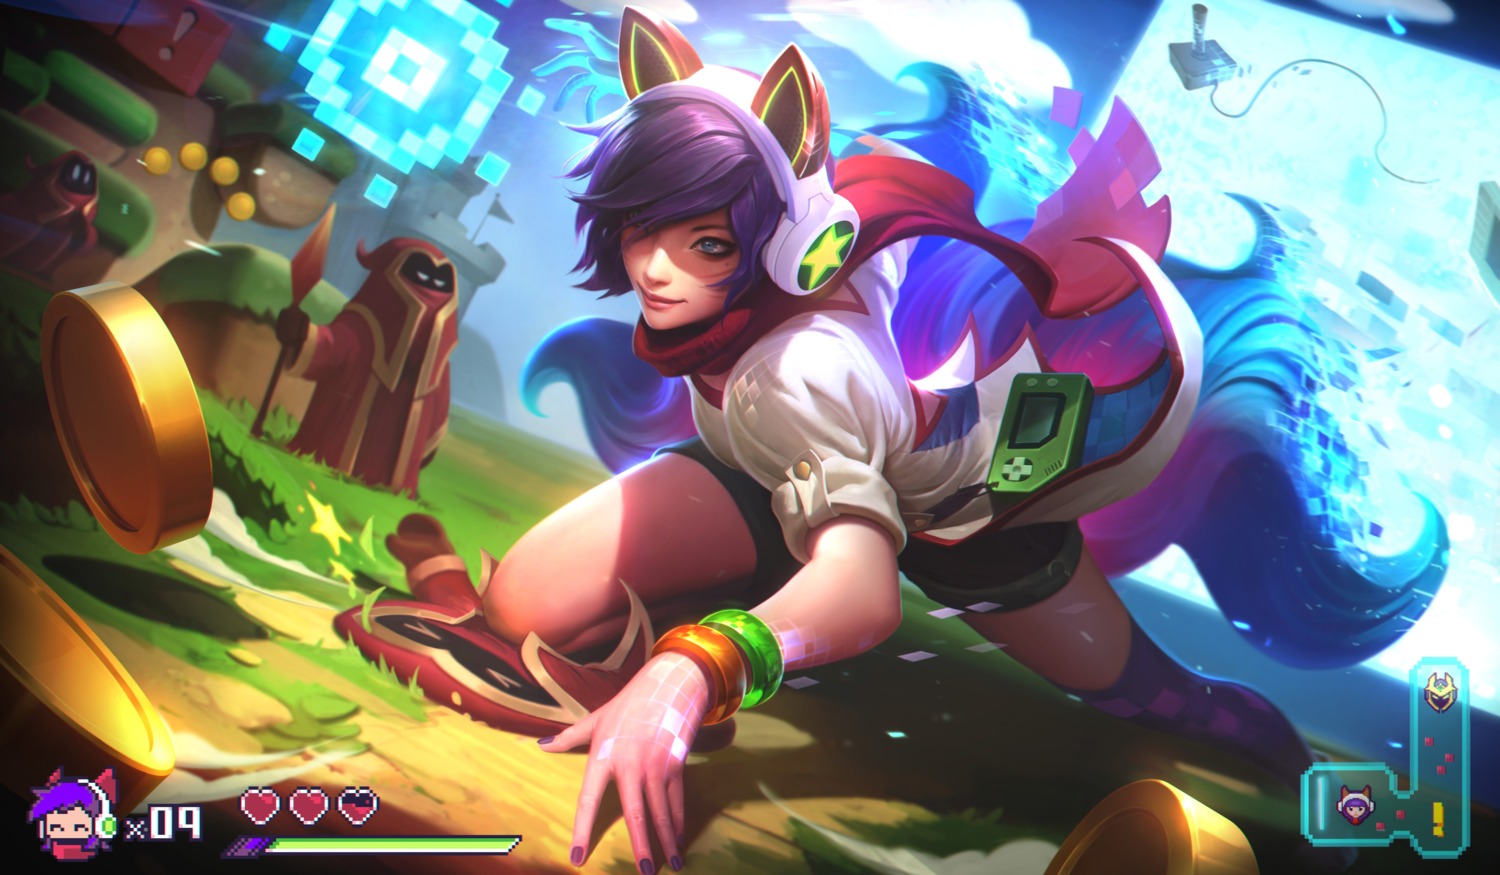 ahri alex_flores animal_ears headphones kitsune league_of_legends possible_duplicate tail thighhighs weapon